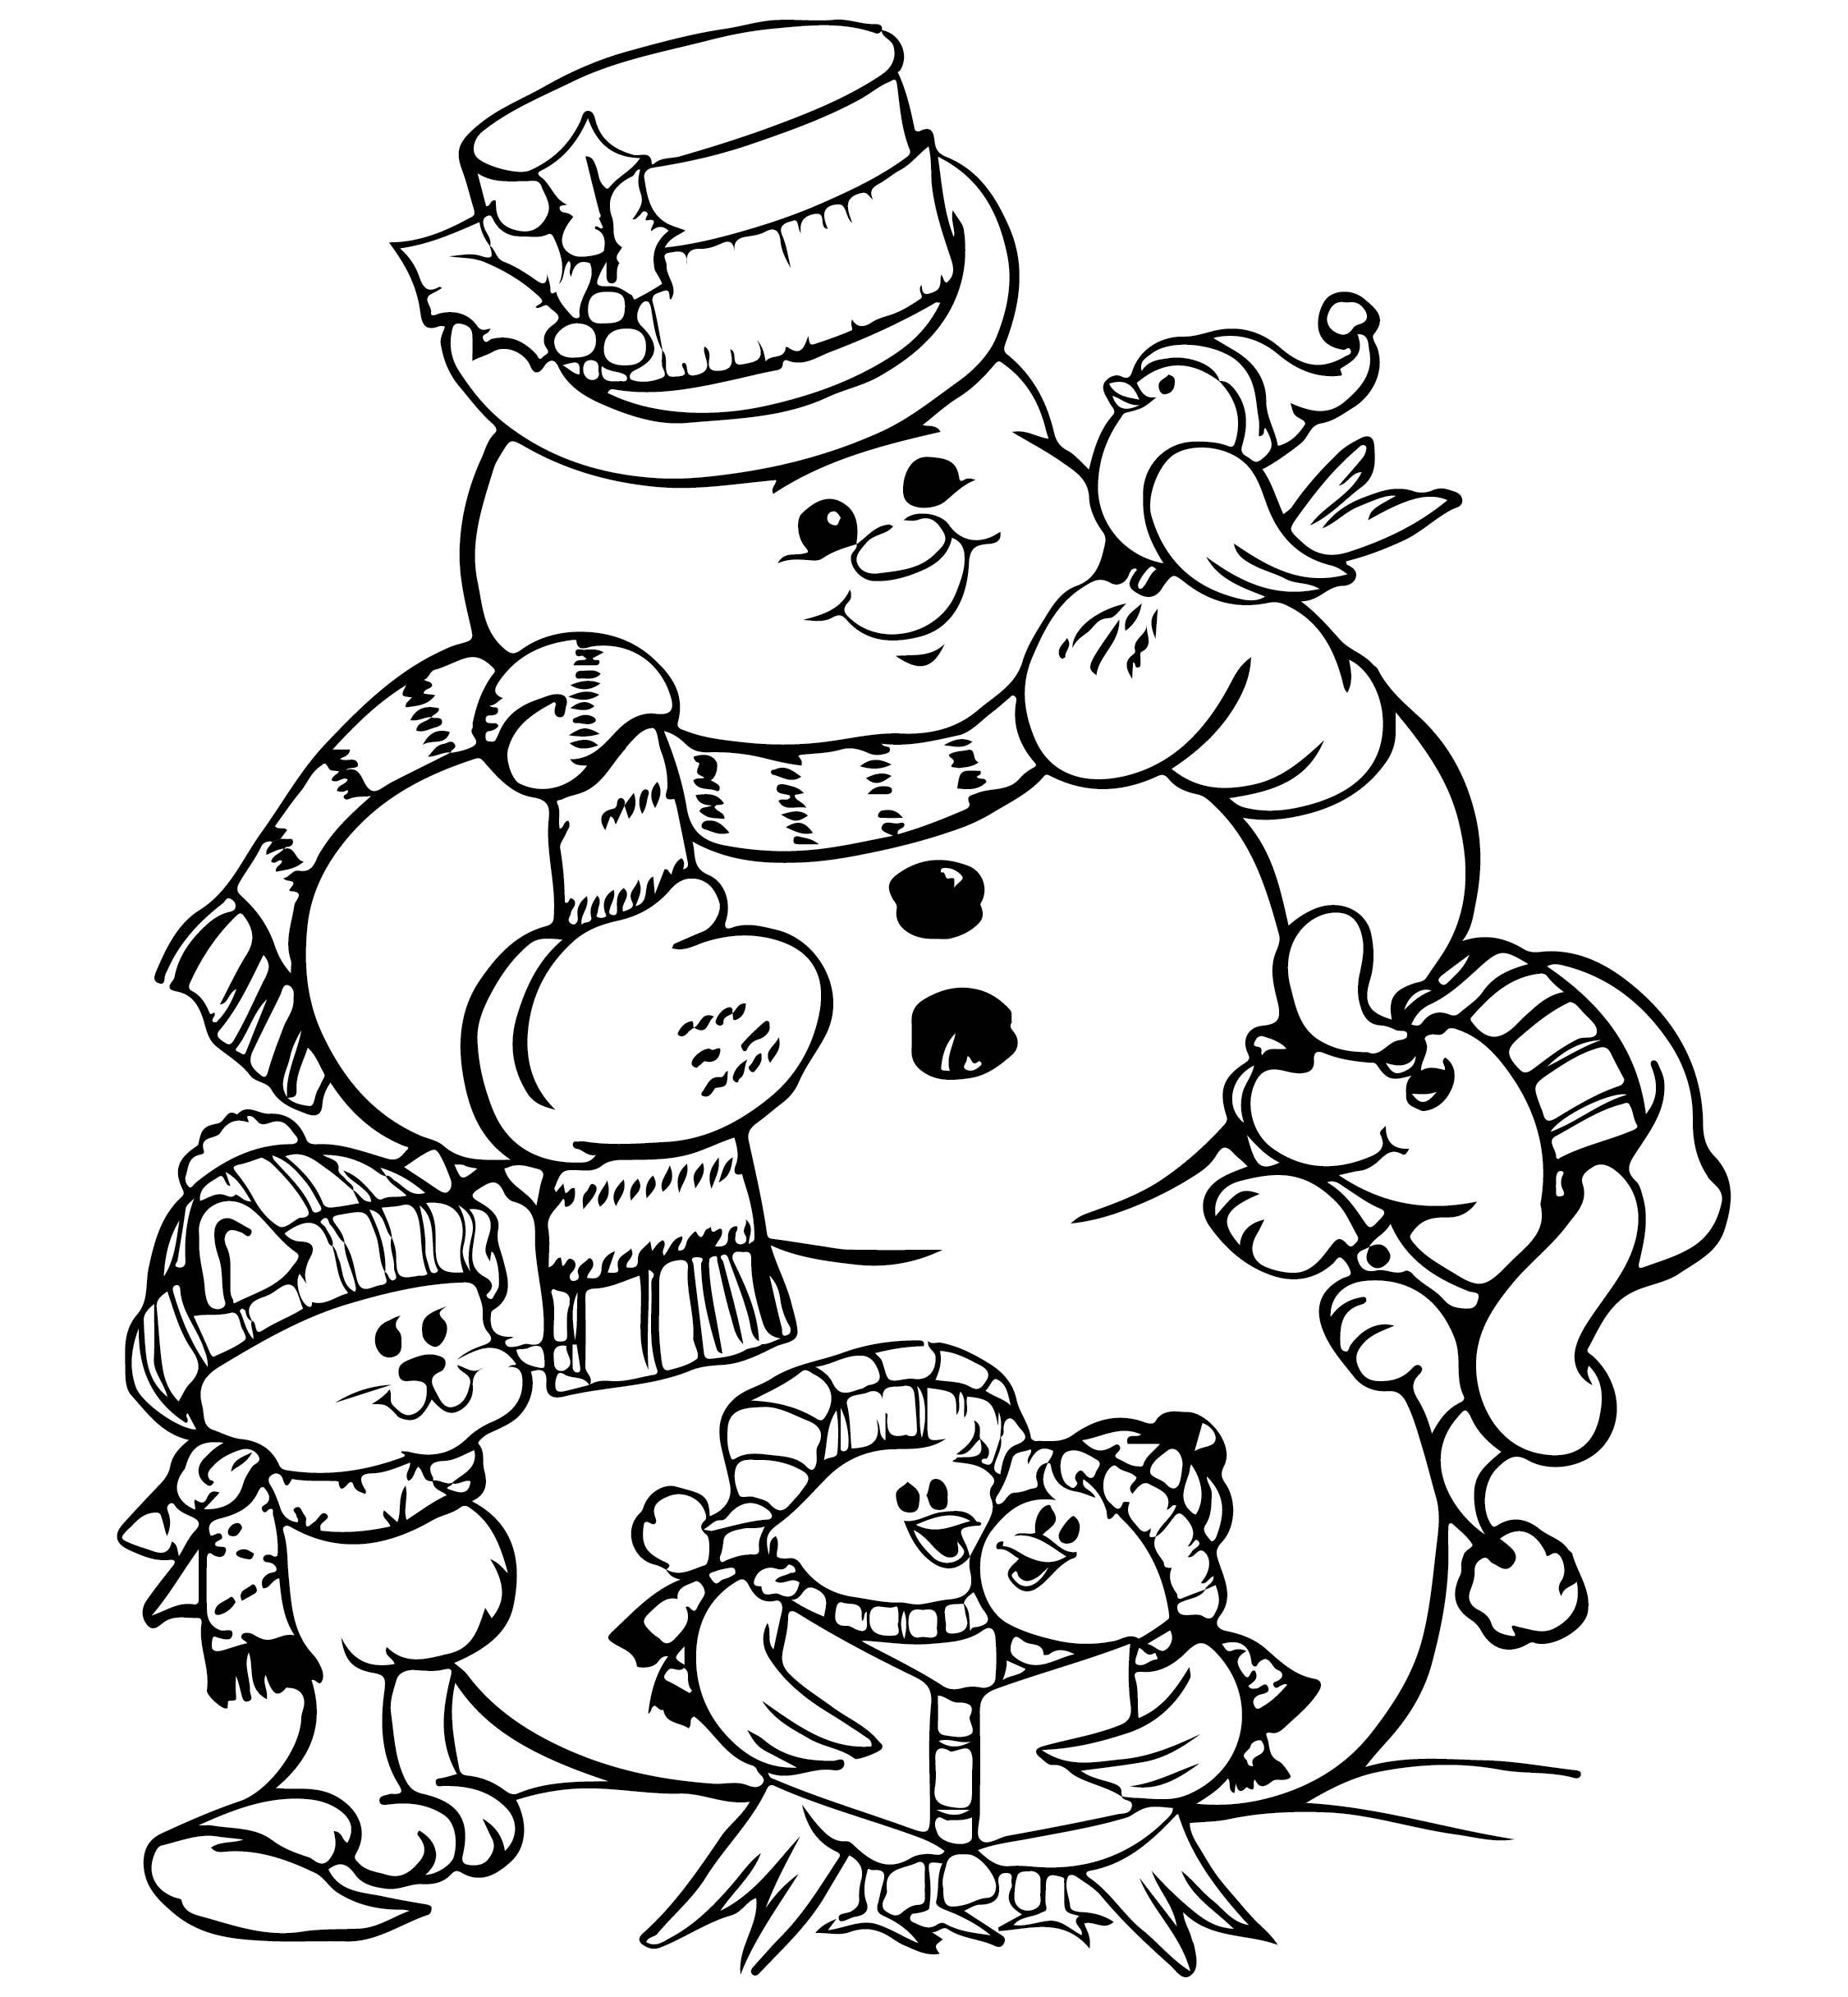 Snowman Coloring Page - Printable Christmas Coloring Pages for Kids Scan